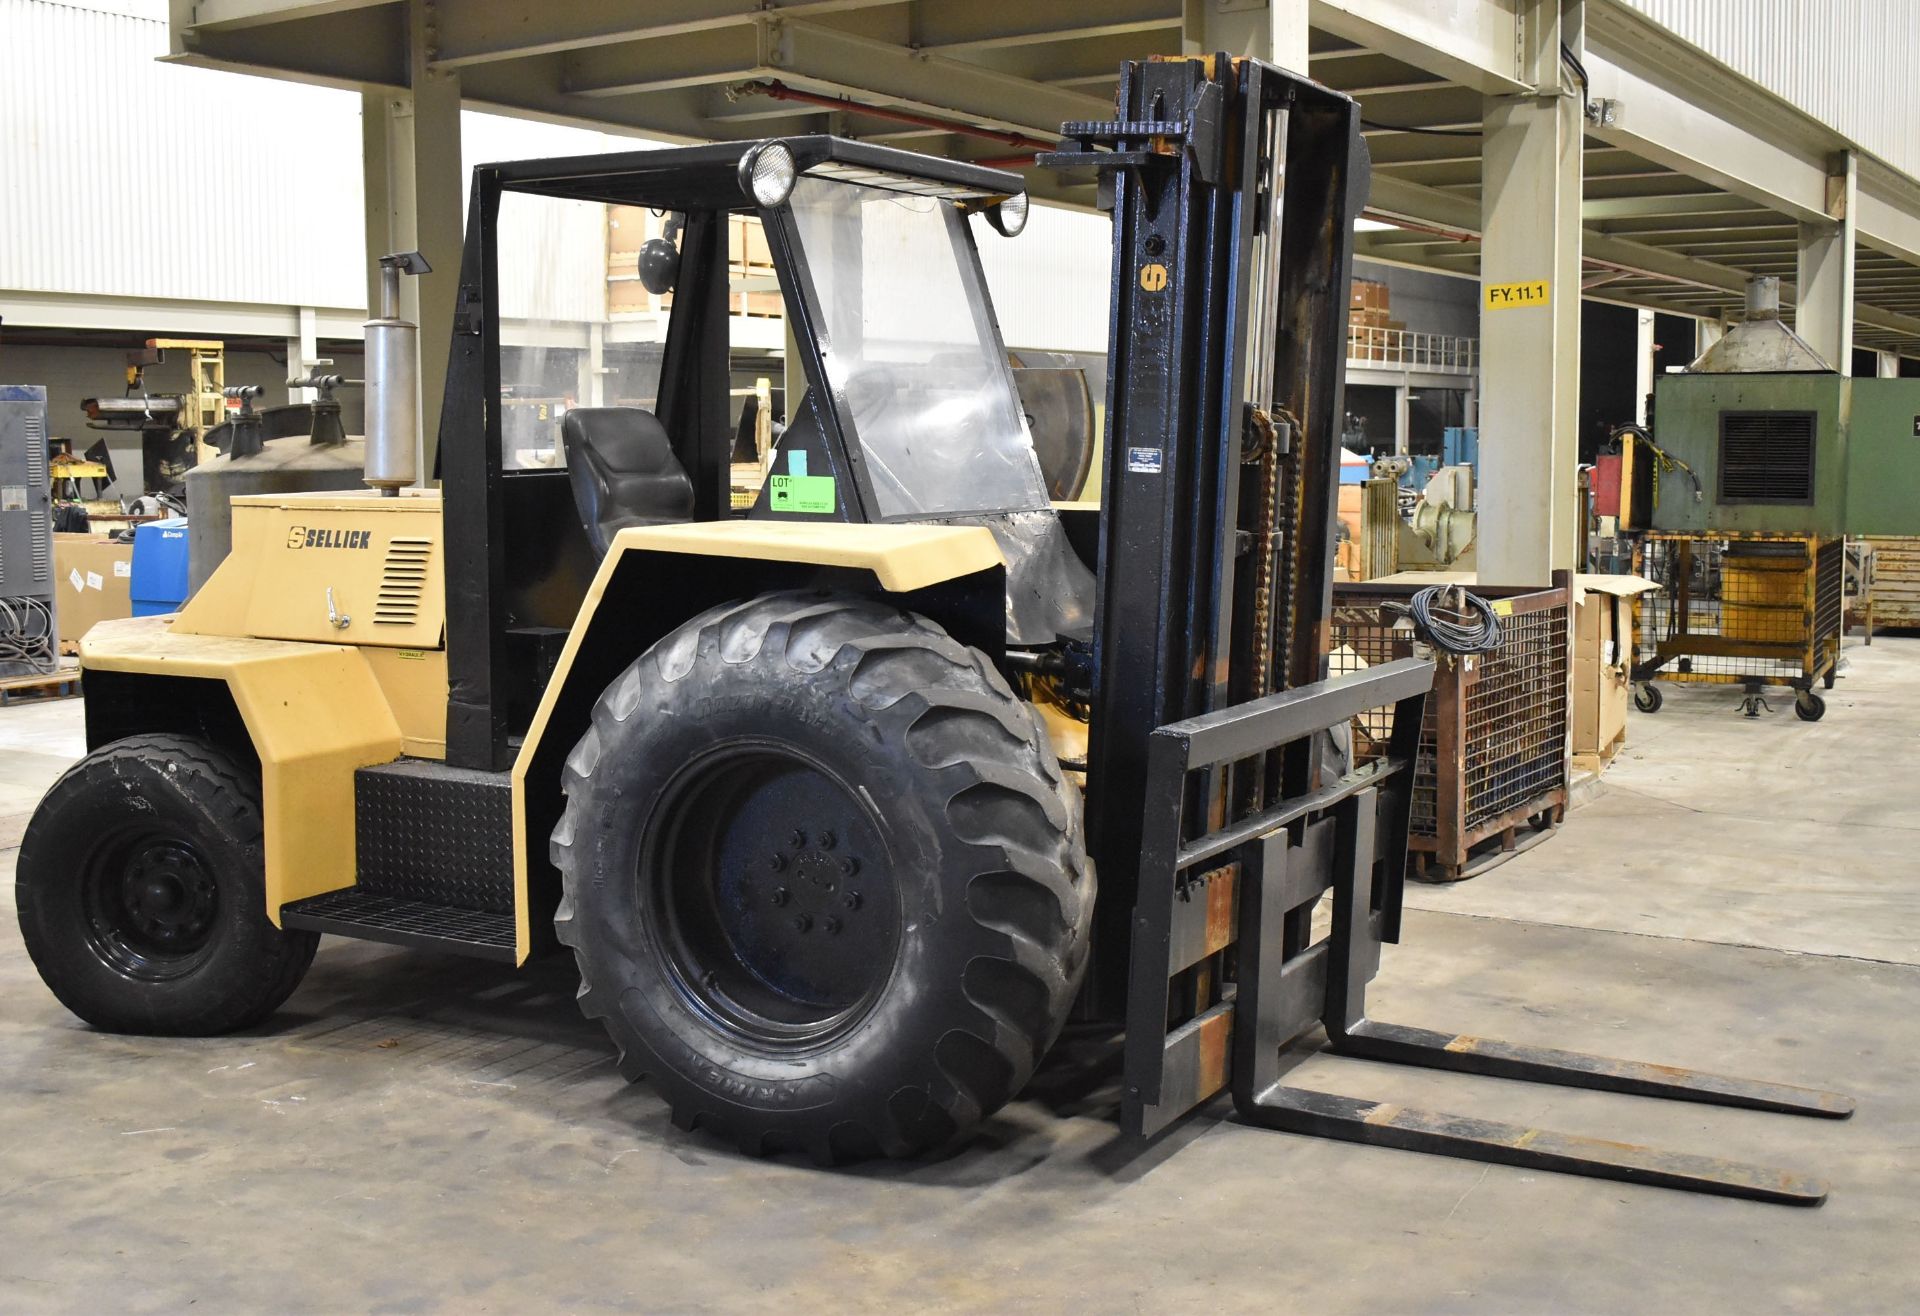 SELLICK MODEL 8000 8000 LB. CAPACITY OUTDOOR DIESEL FORKLIFT WITH 180" MAX. LIFT HEIGHT, 3-STAGE